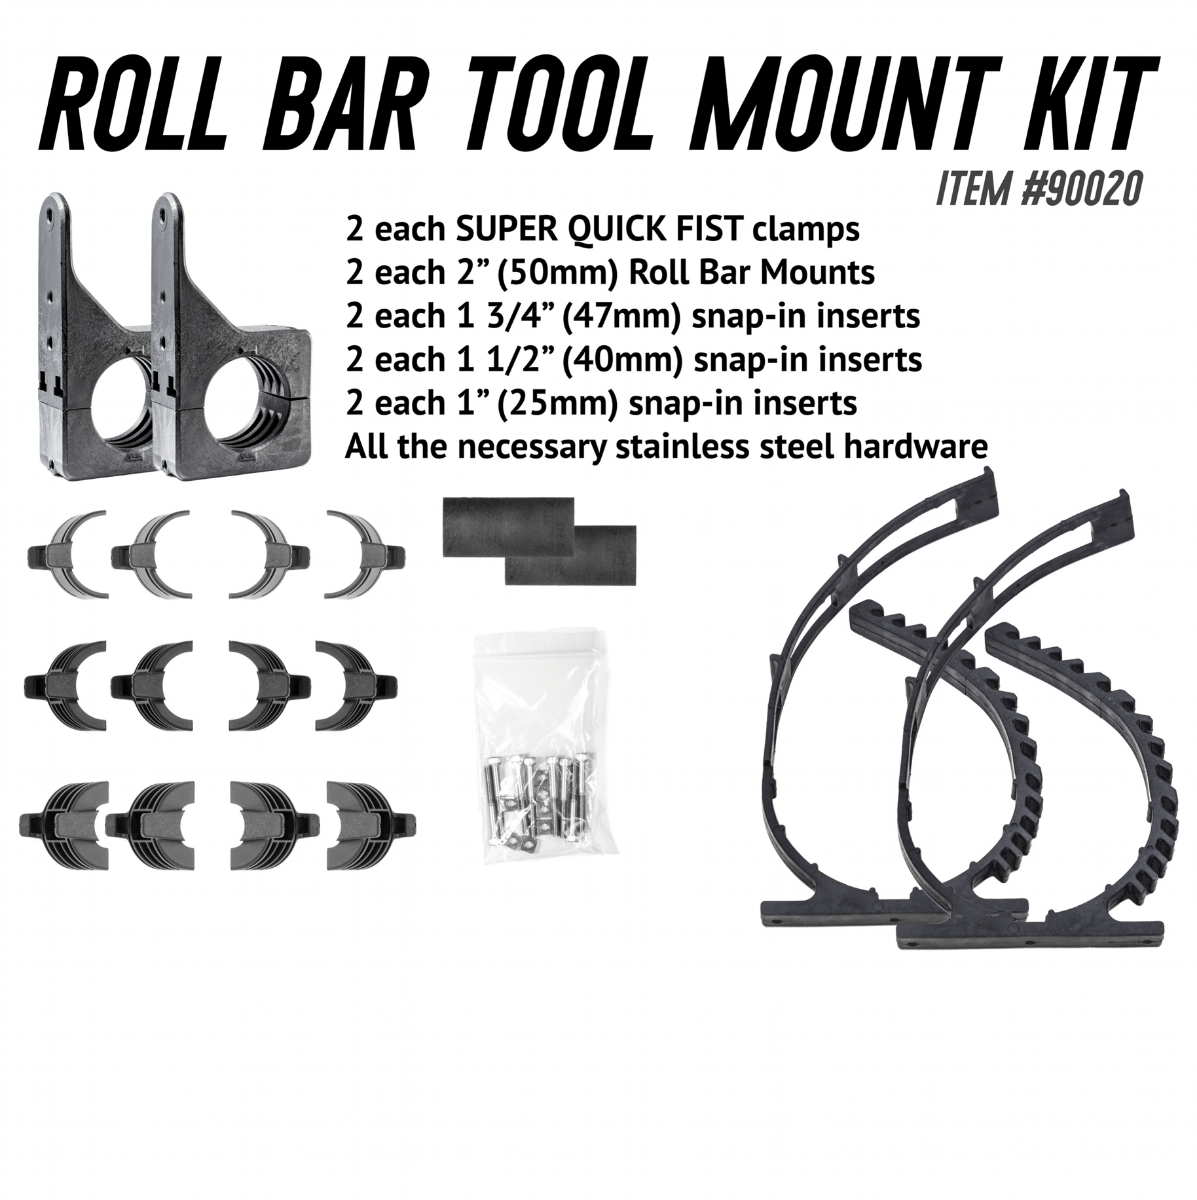 Roll Bar Tool Mount Kit Quick Fist Clamps parts